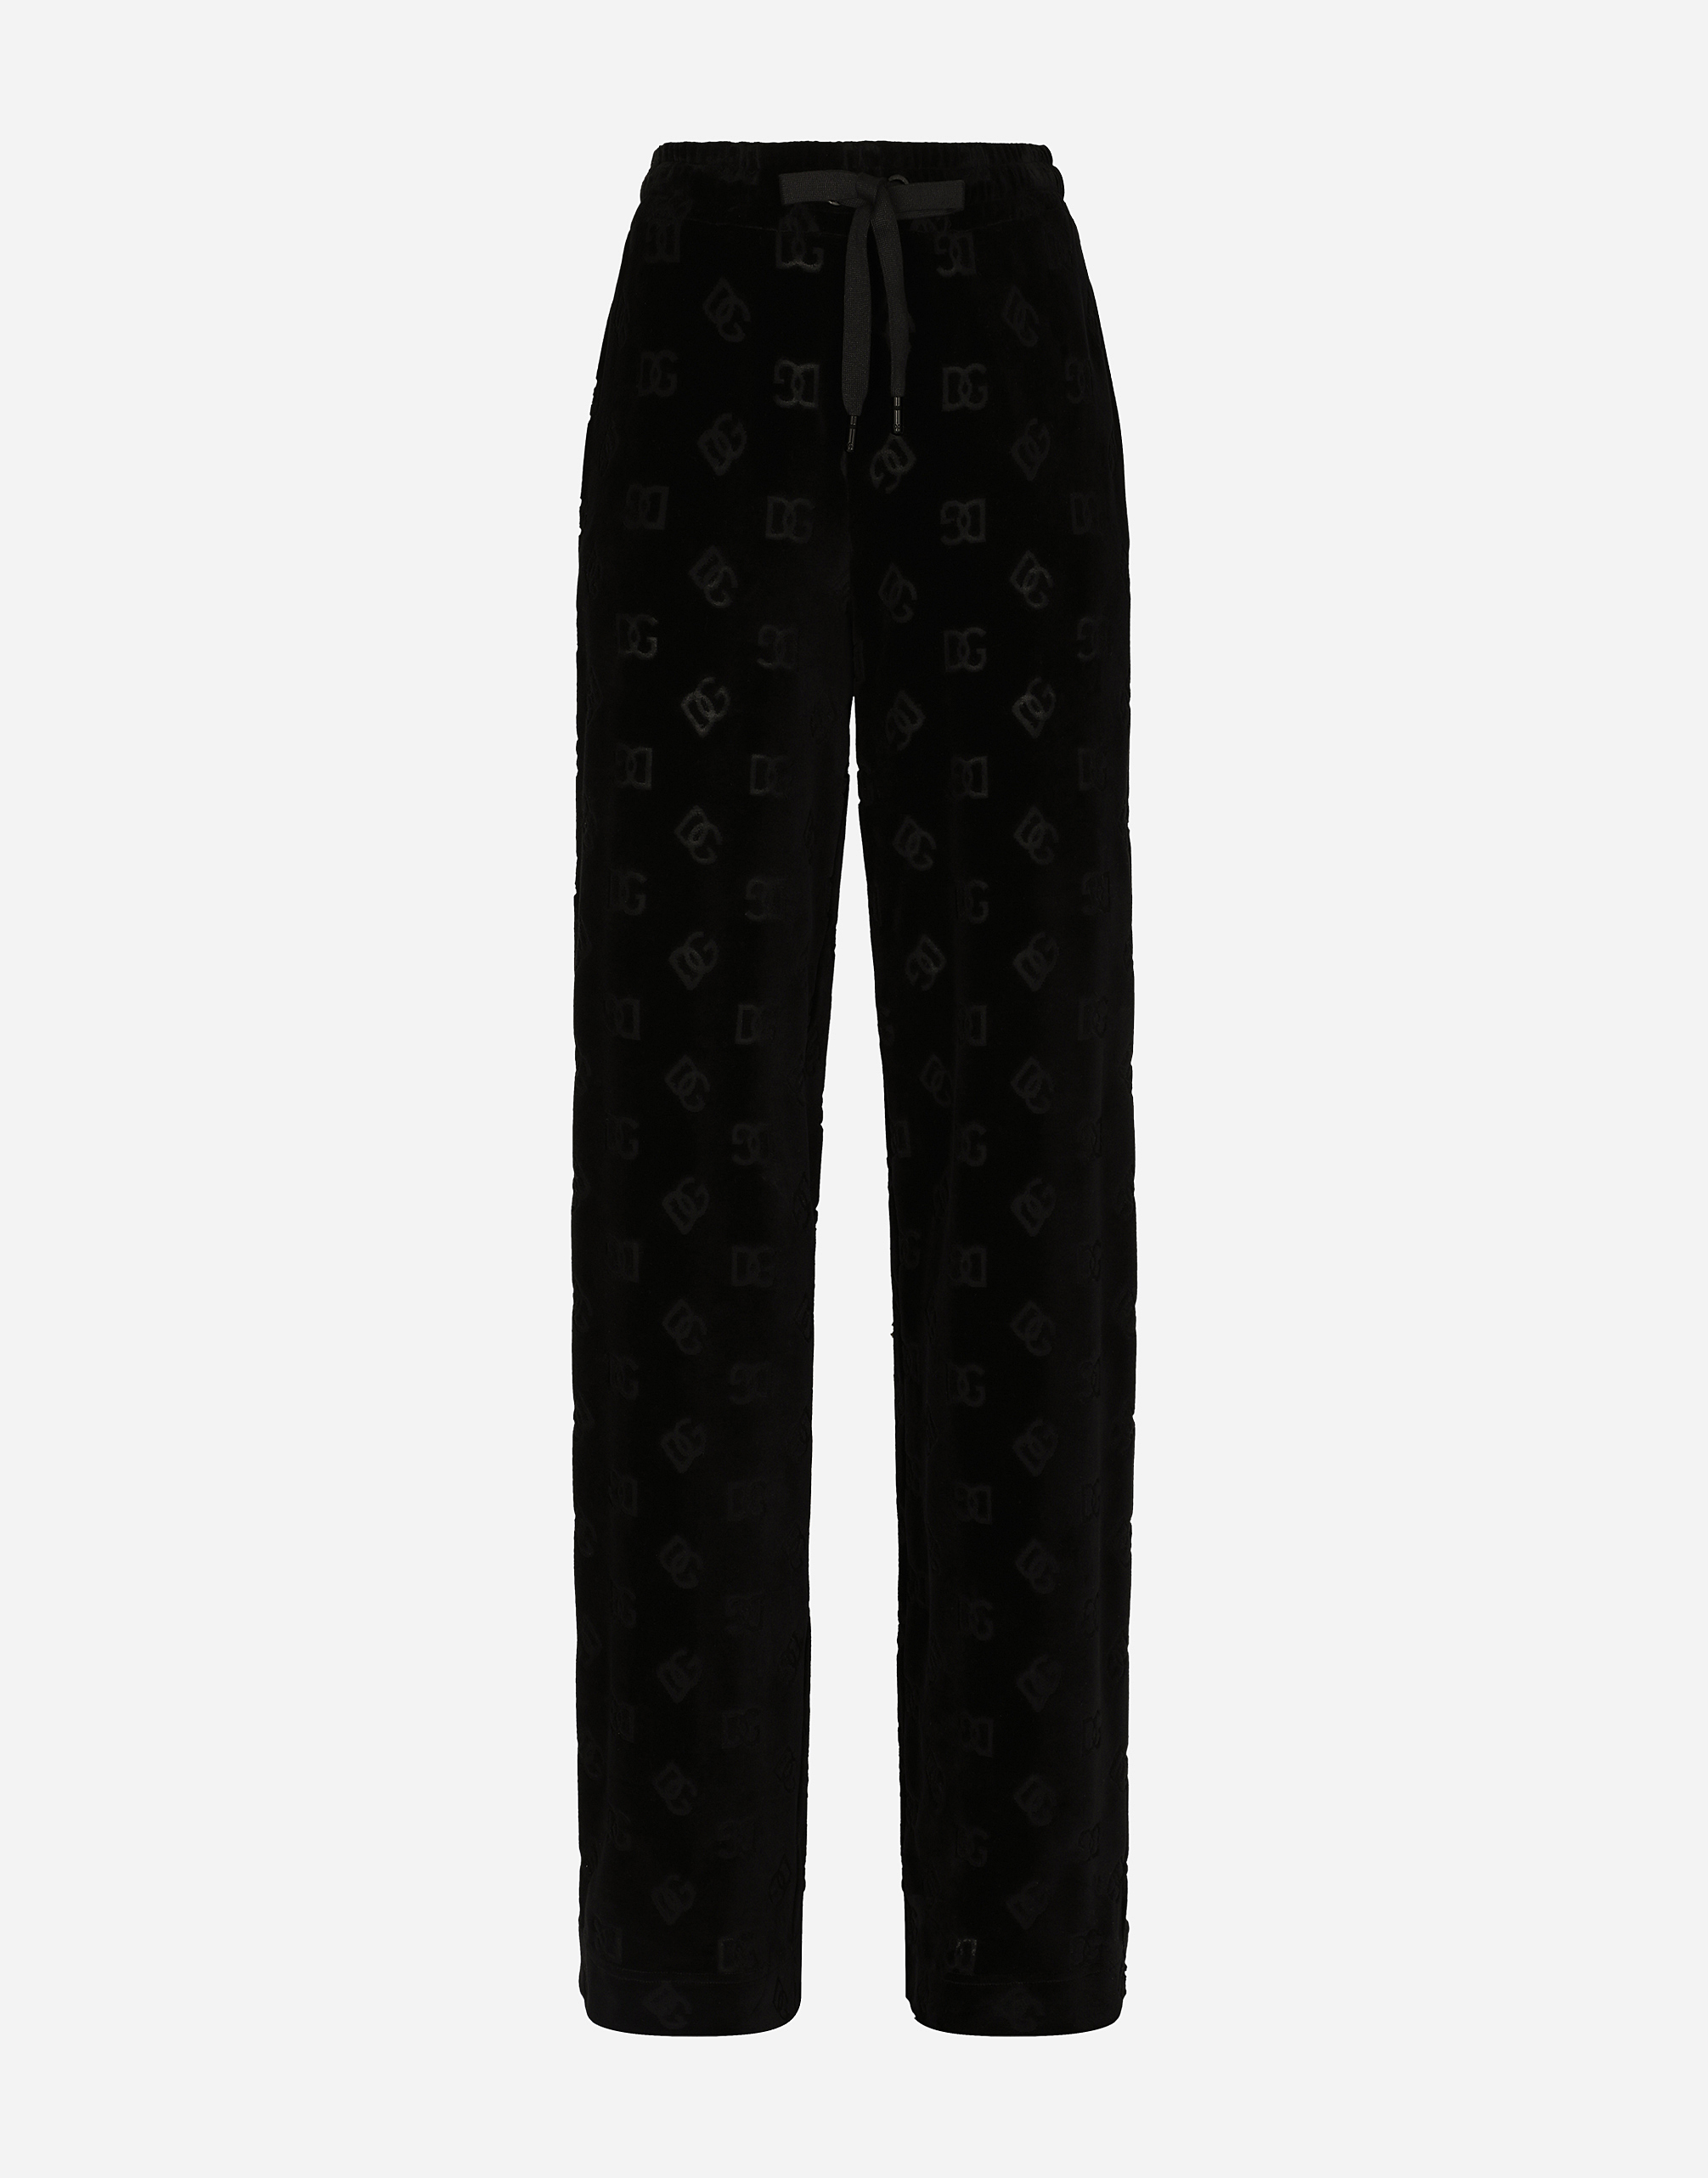 Flocked jersey pants with all-over DG logo in Black